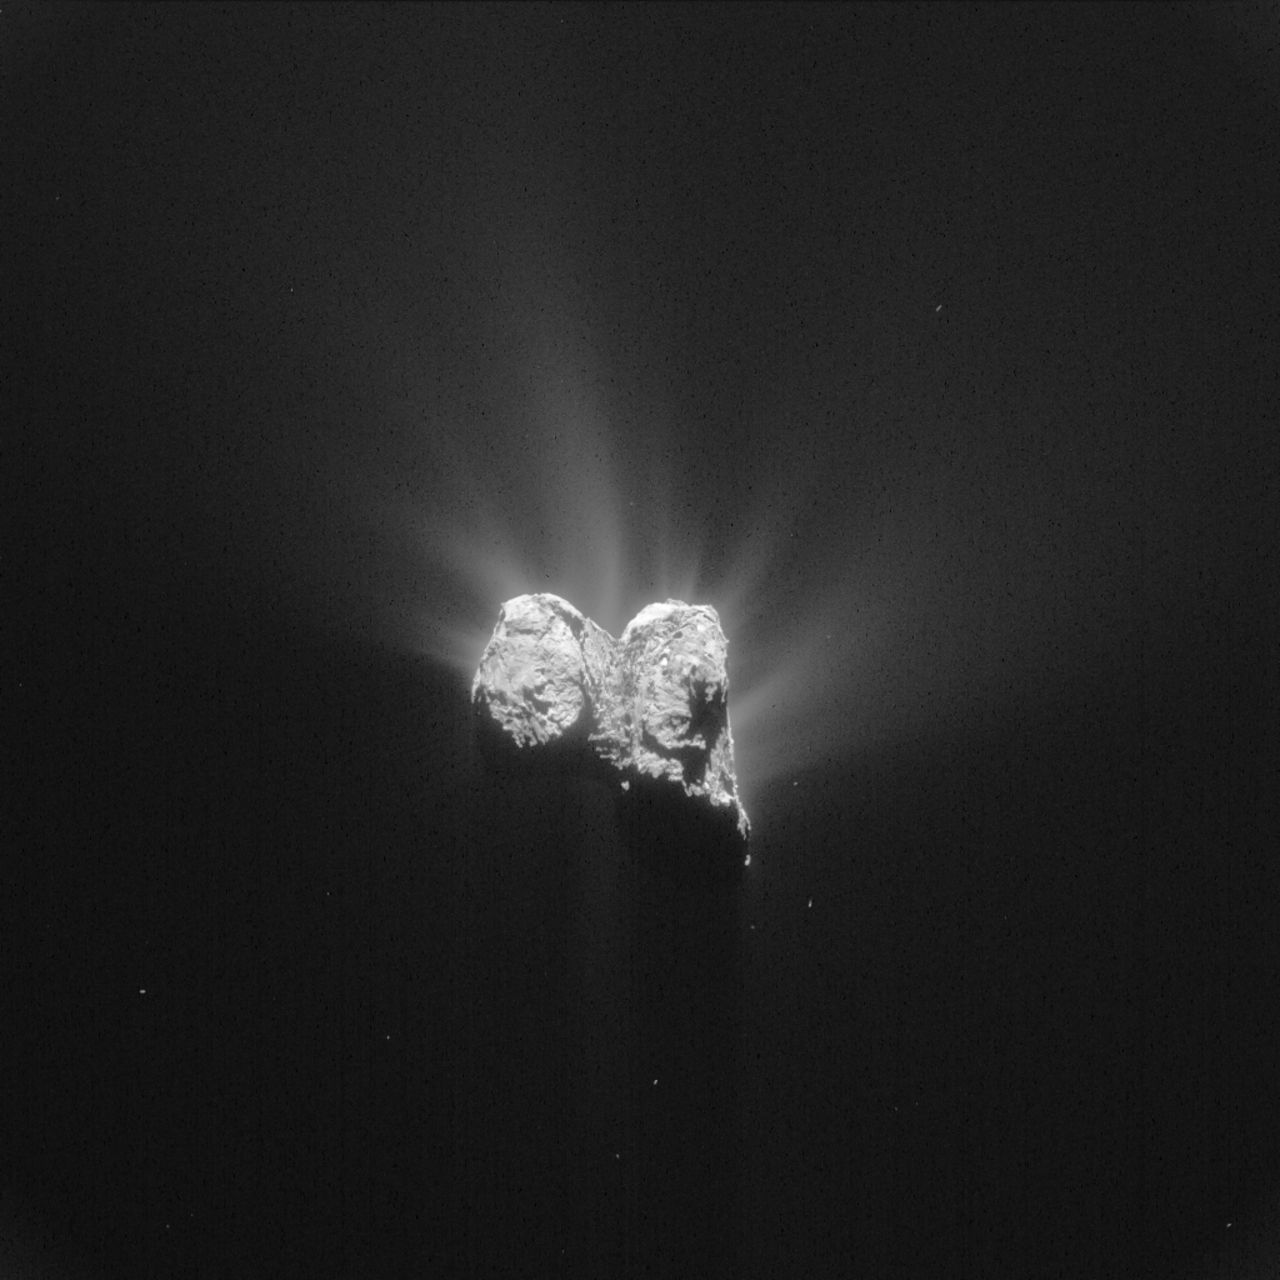 Rosetta's navigation camera took this image of the comet on June 1, 2015.